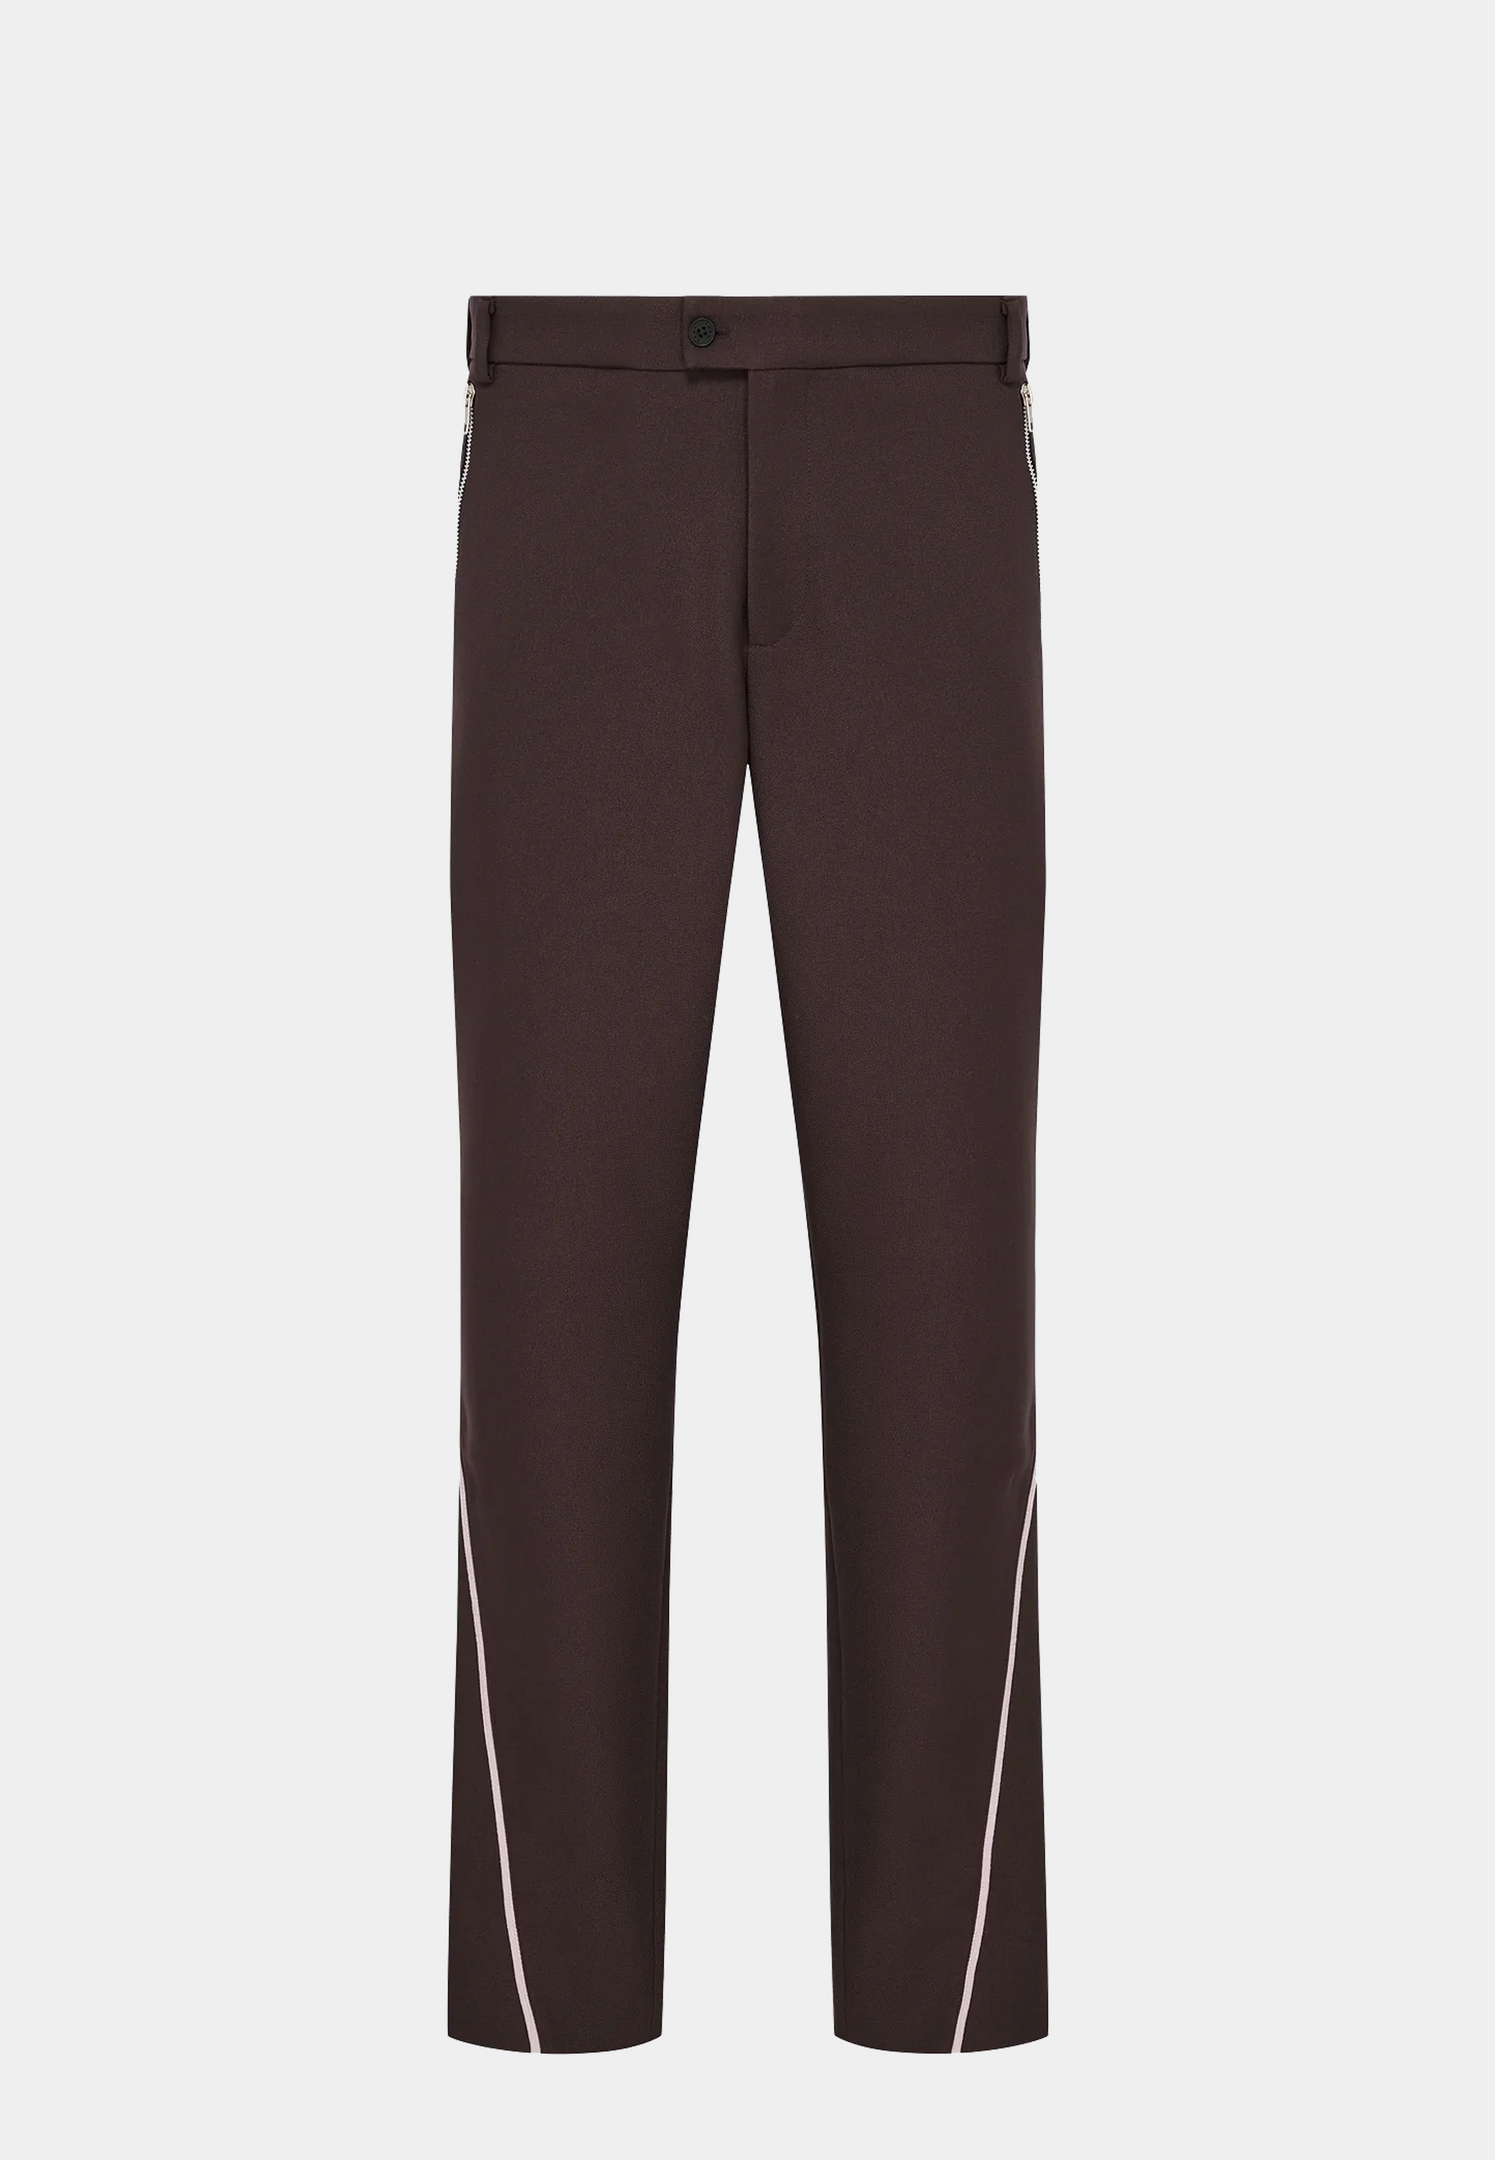 GMBH Tailored Trousers - Brown